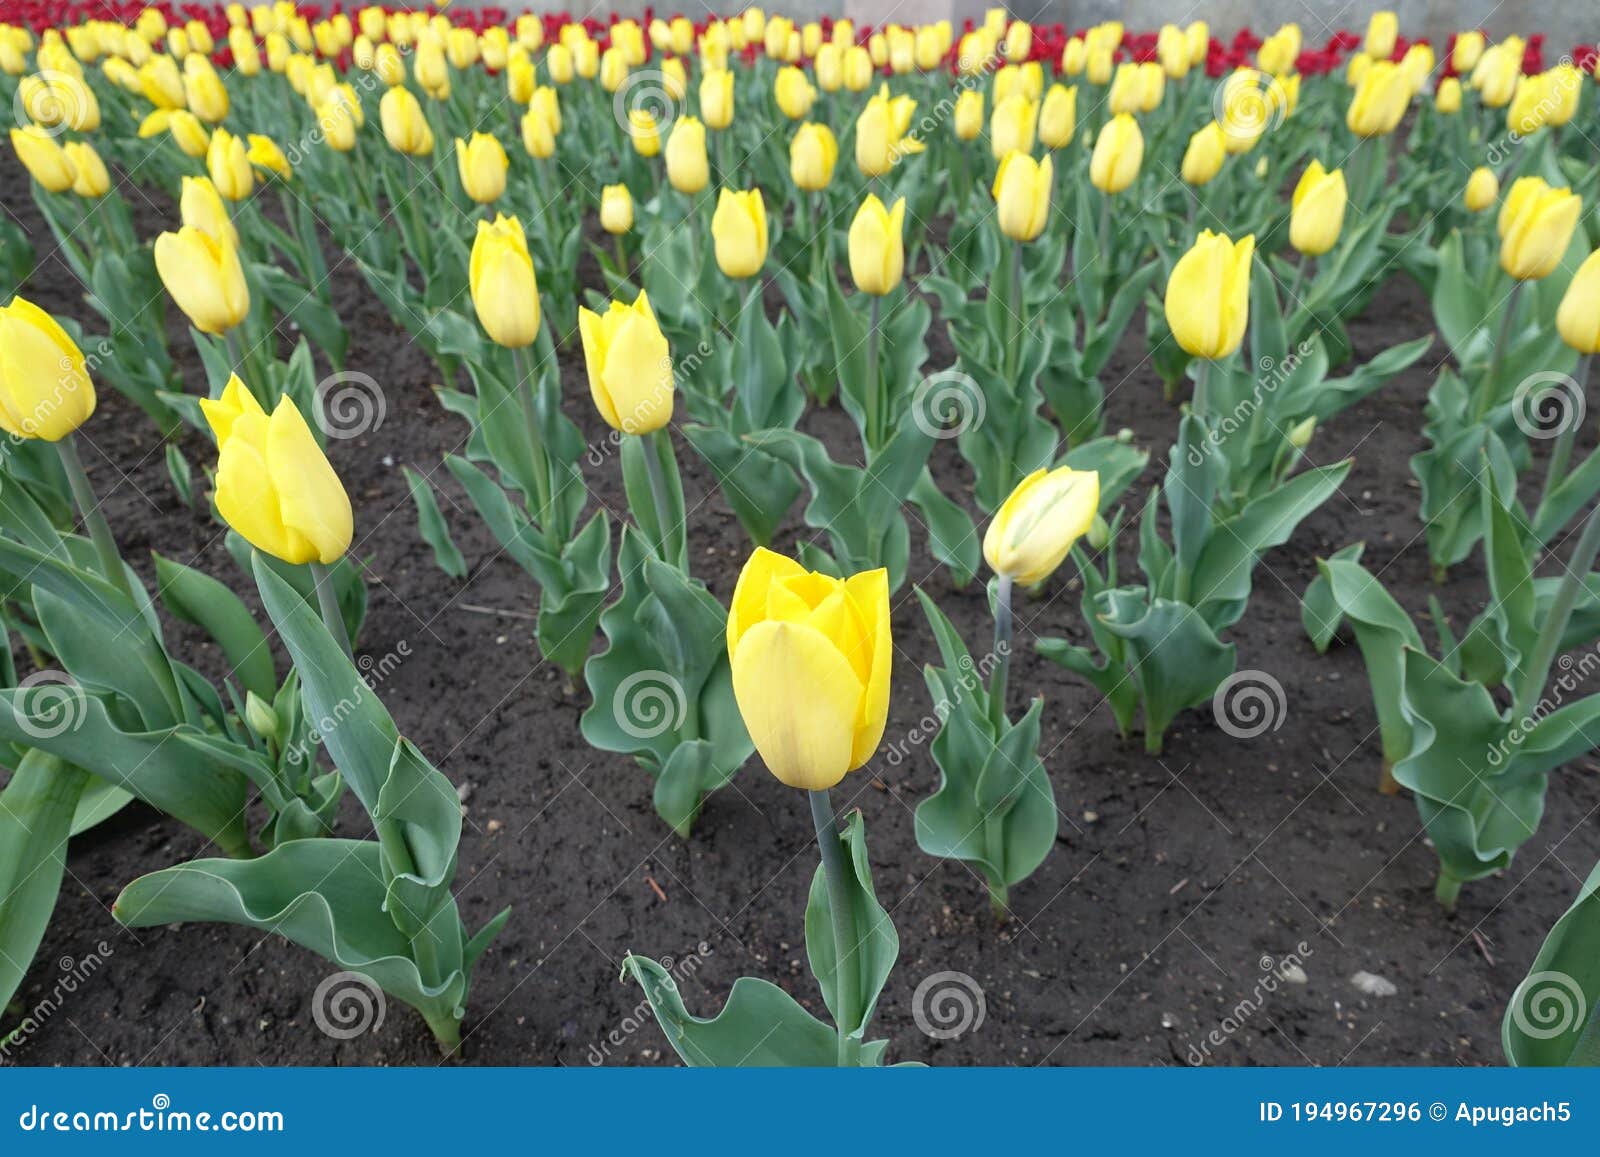 florescence of bright yellow tulips